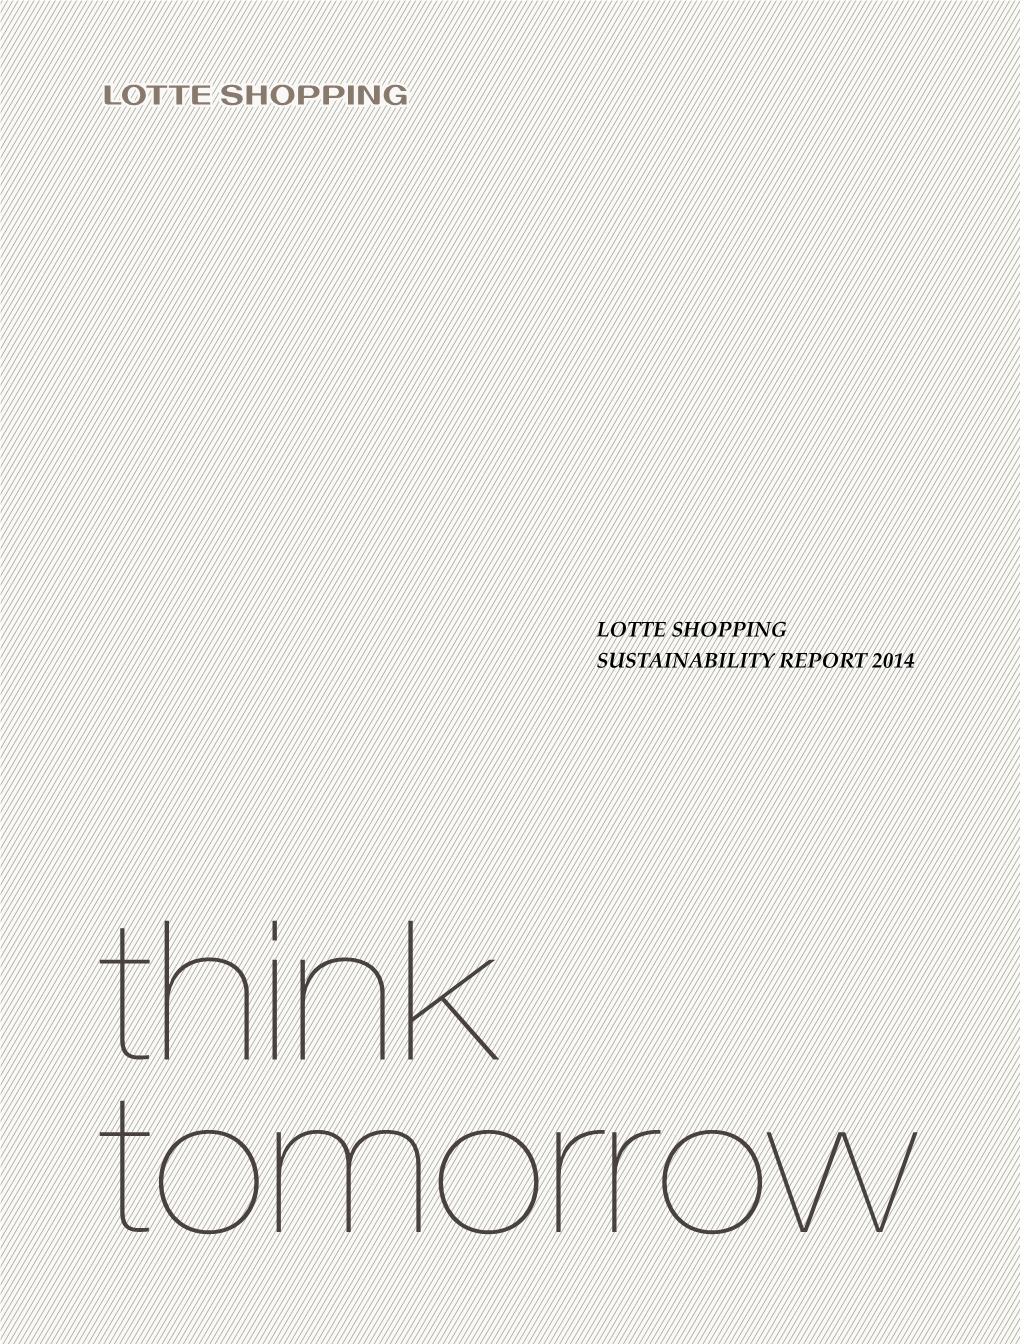 LOTTE SHOPPING SUSTAINABILITY REPORT 2014 Think Tomorrow 00 Introduction 00 Contents About This Report 01 About This Report 02 CEO’S Message